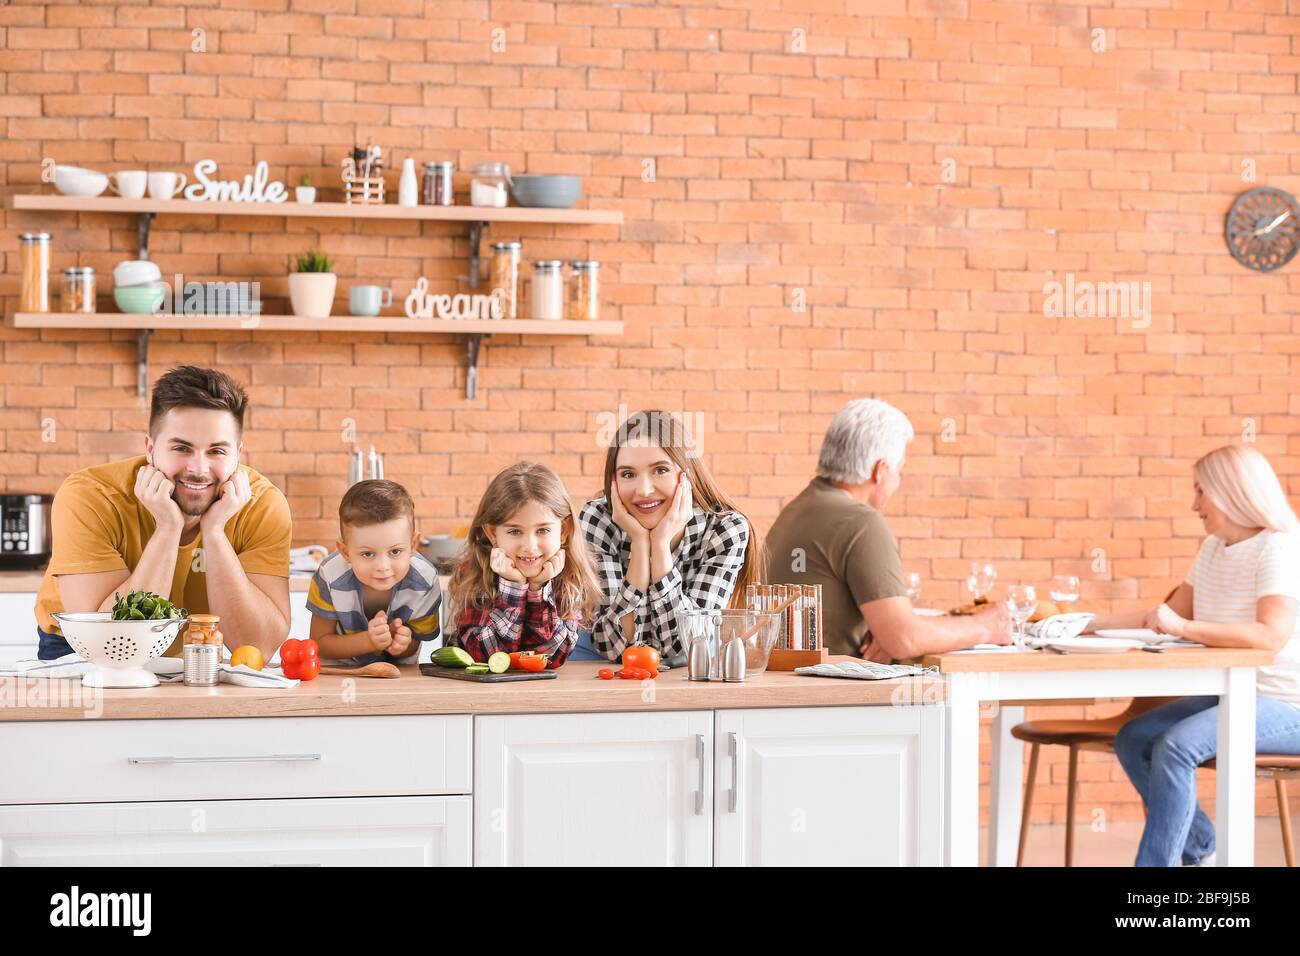 Big family spending time together in kitchen Stock Photo